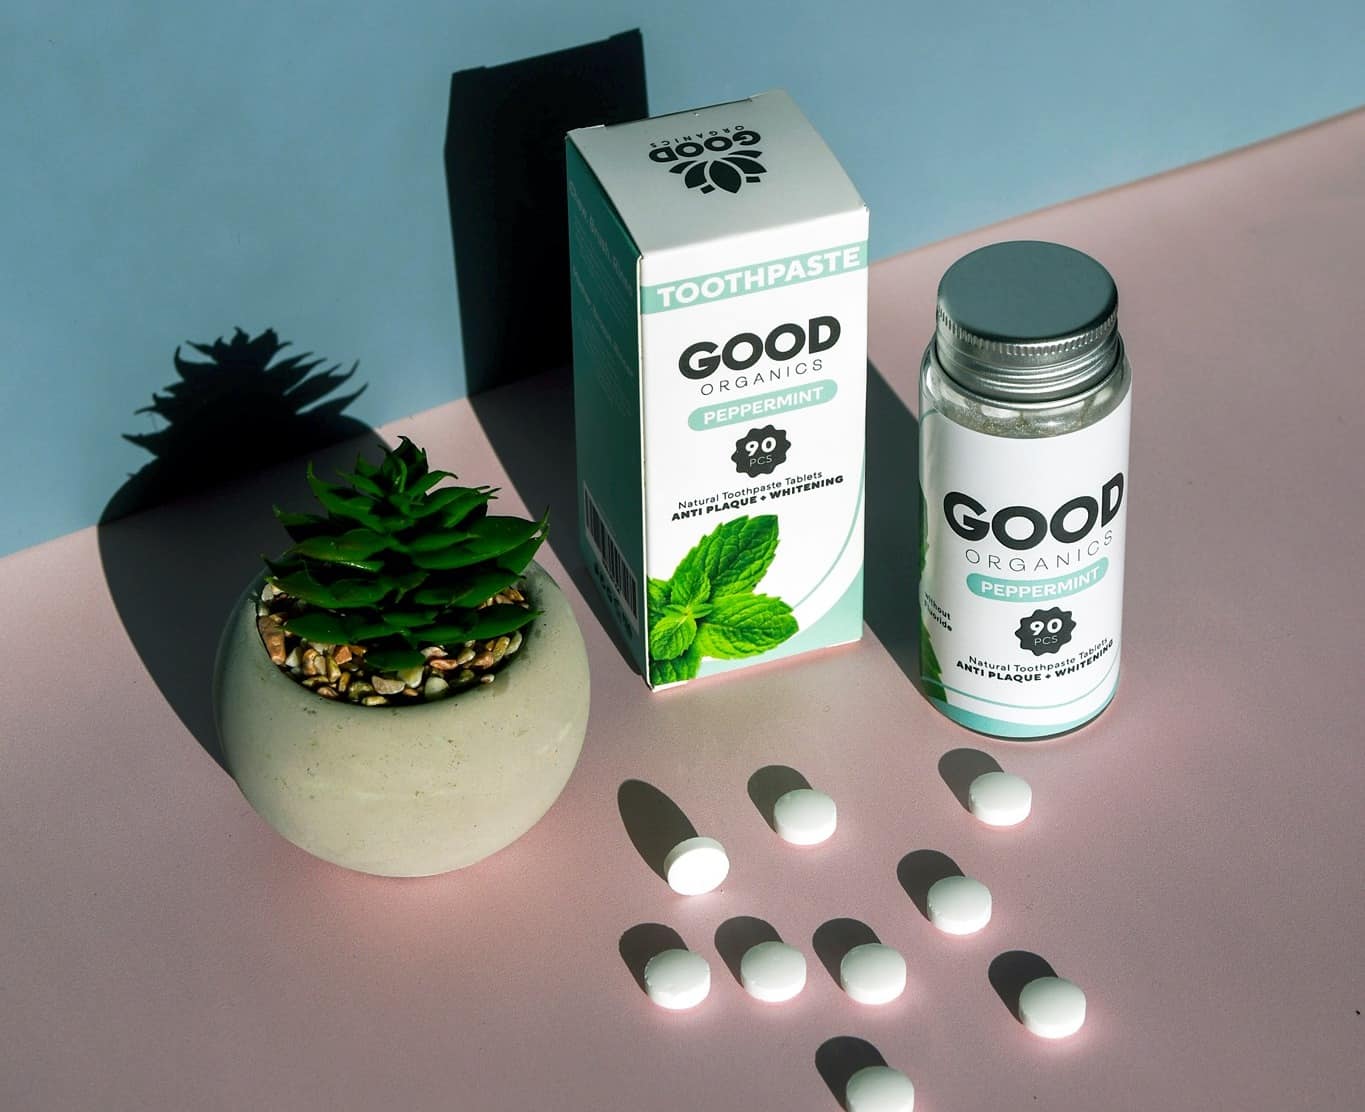 Bite Down on This! BC-based Good Organics Launches Organic Toothpaste Tablets